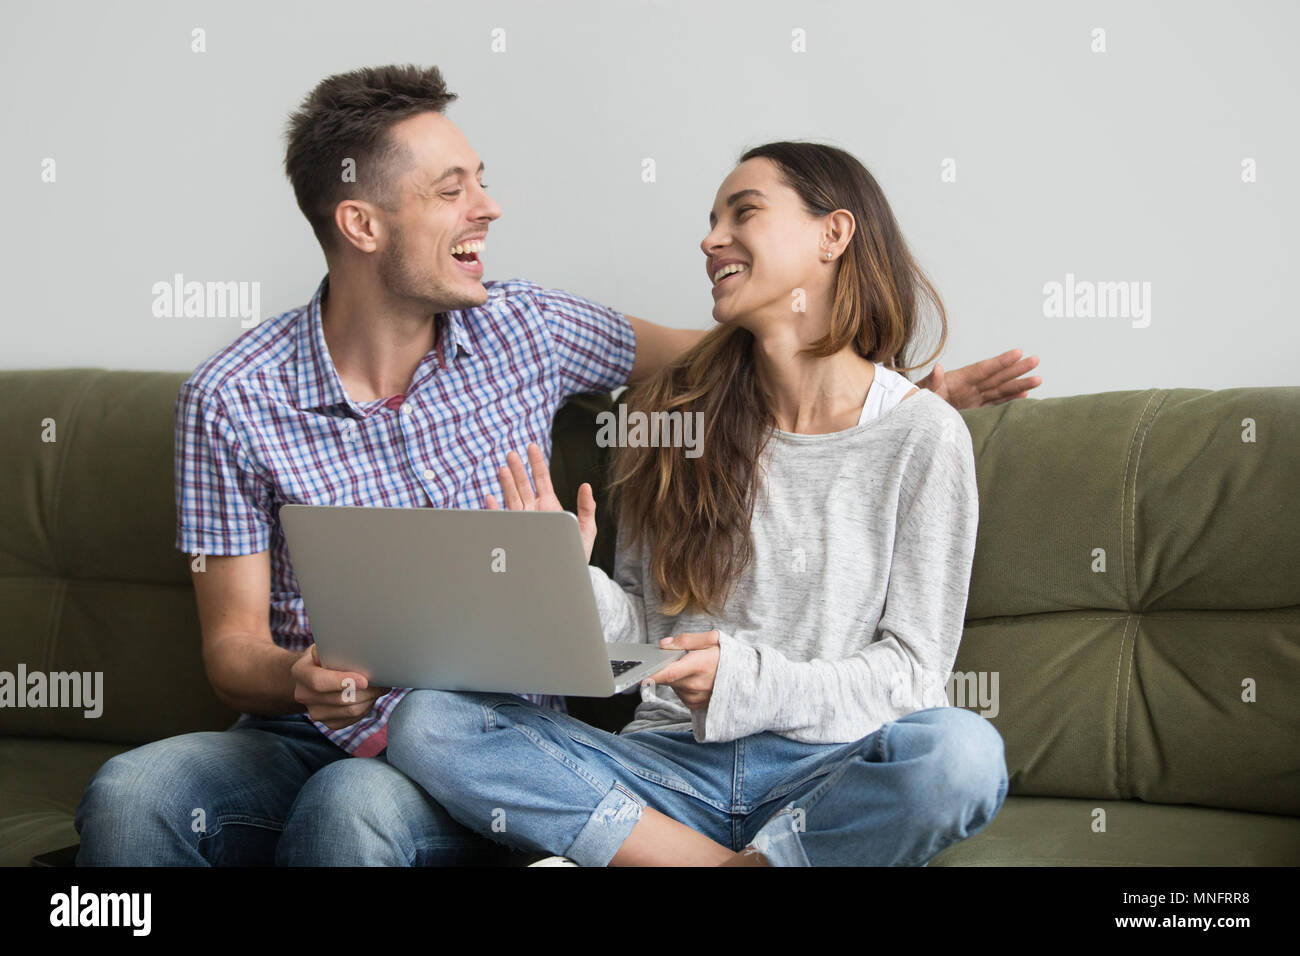 Couple laughing after watching funny video Stock Photo